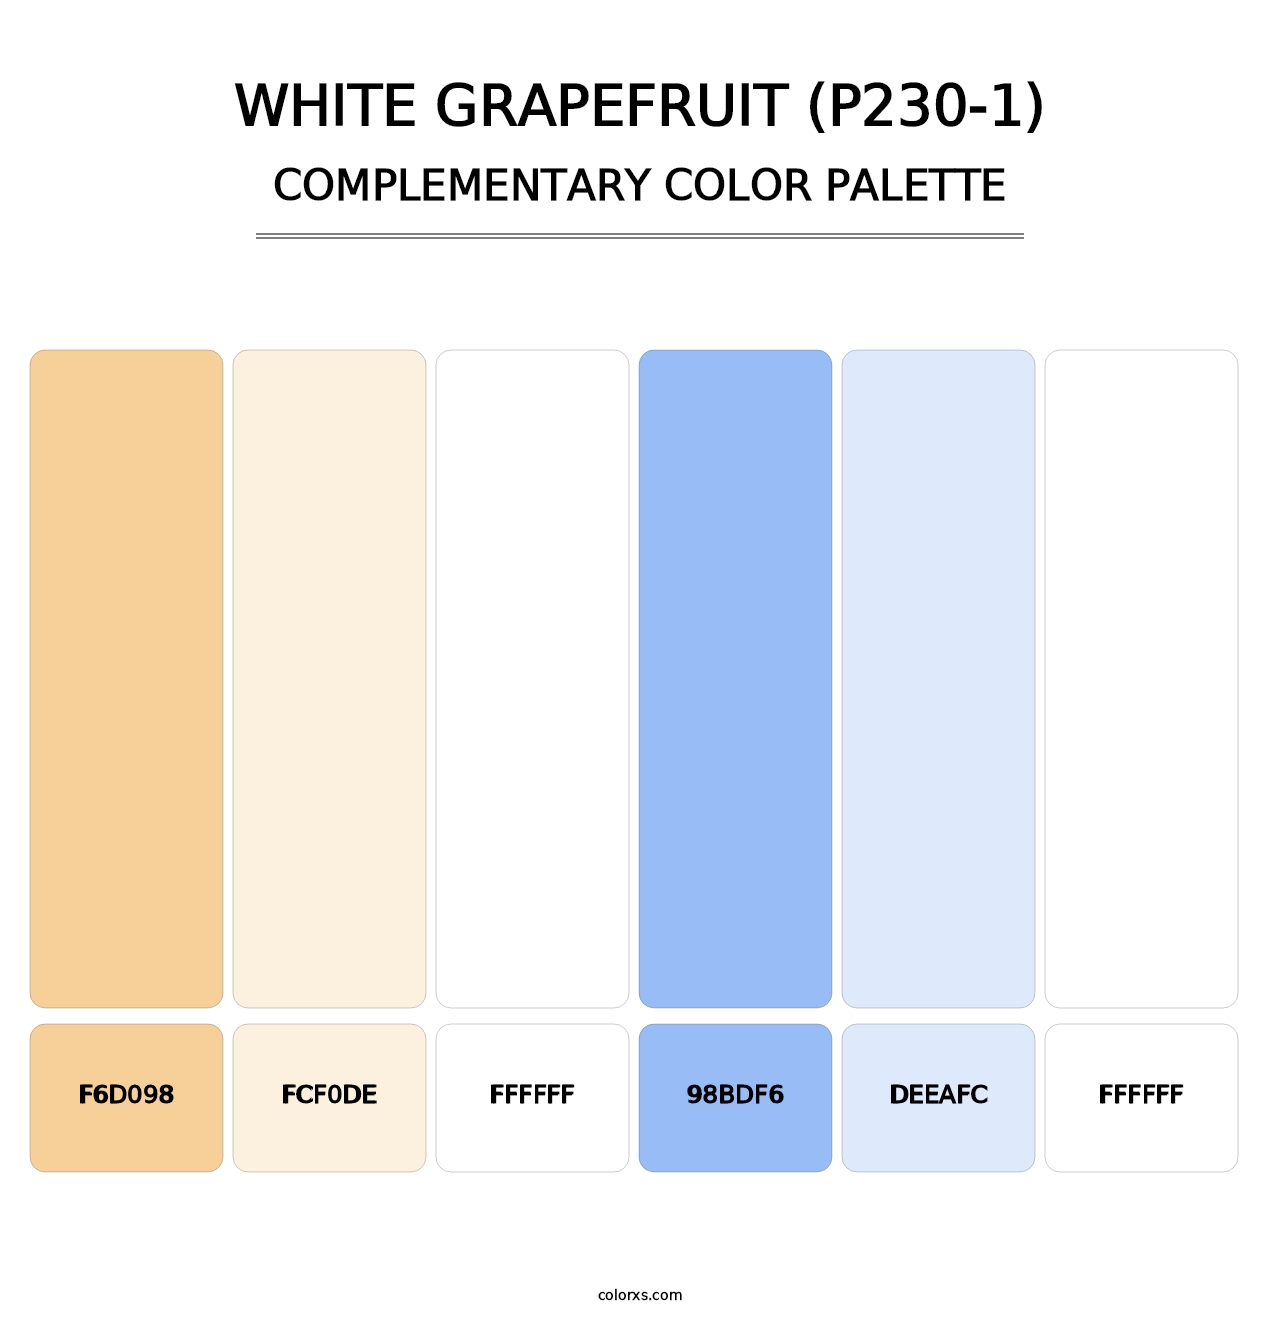 White Grapefruit (P230-1) - Complementary Color Palette